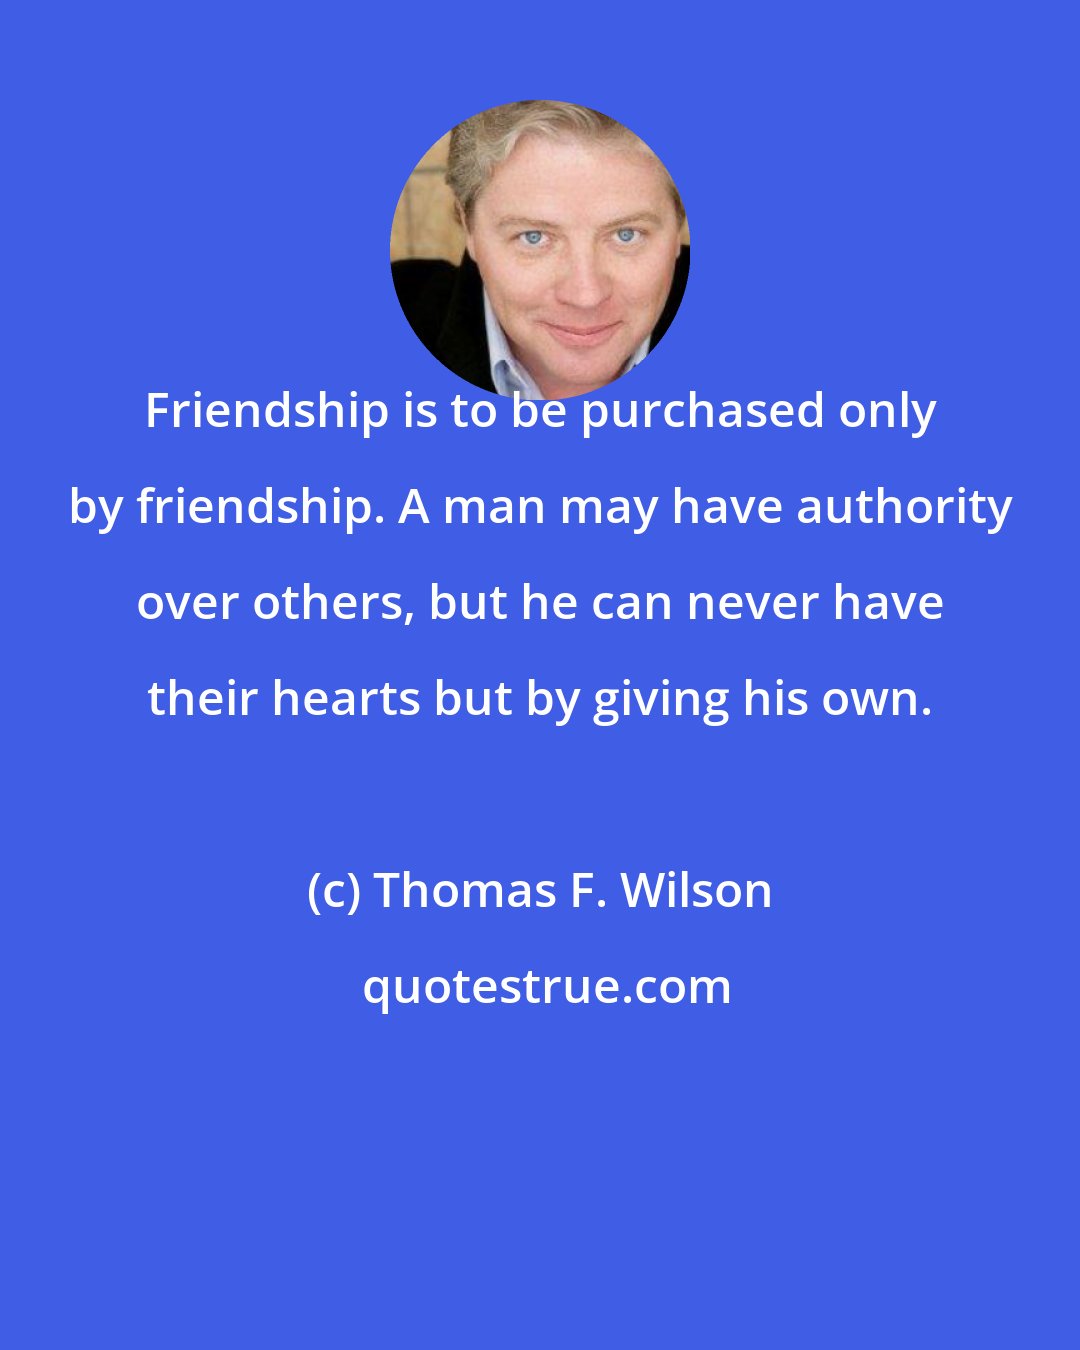 Thomas F. Wilson: Friendship is to be purchased only by friendship. A man may have authority over others, but he can never have their hearts but by giving his own.